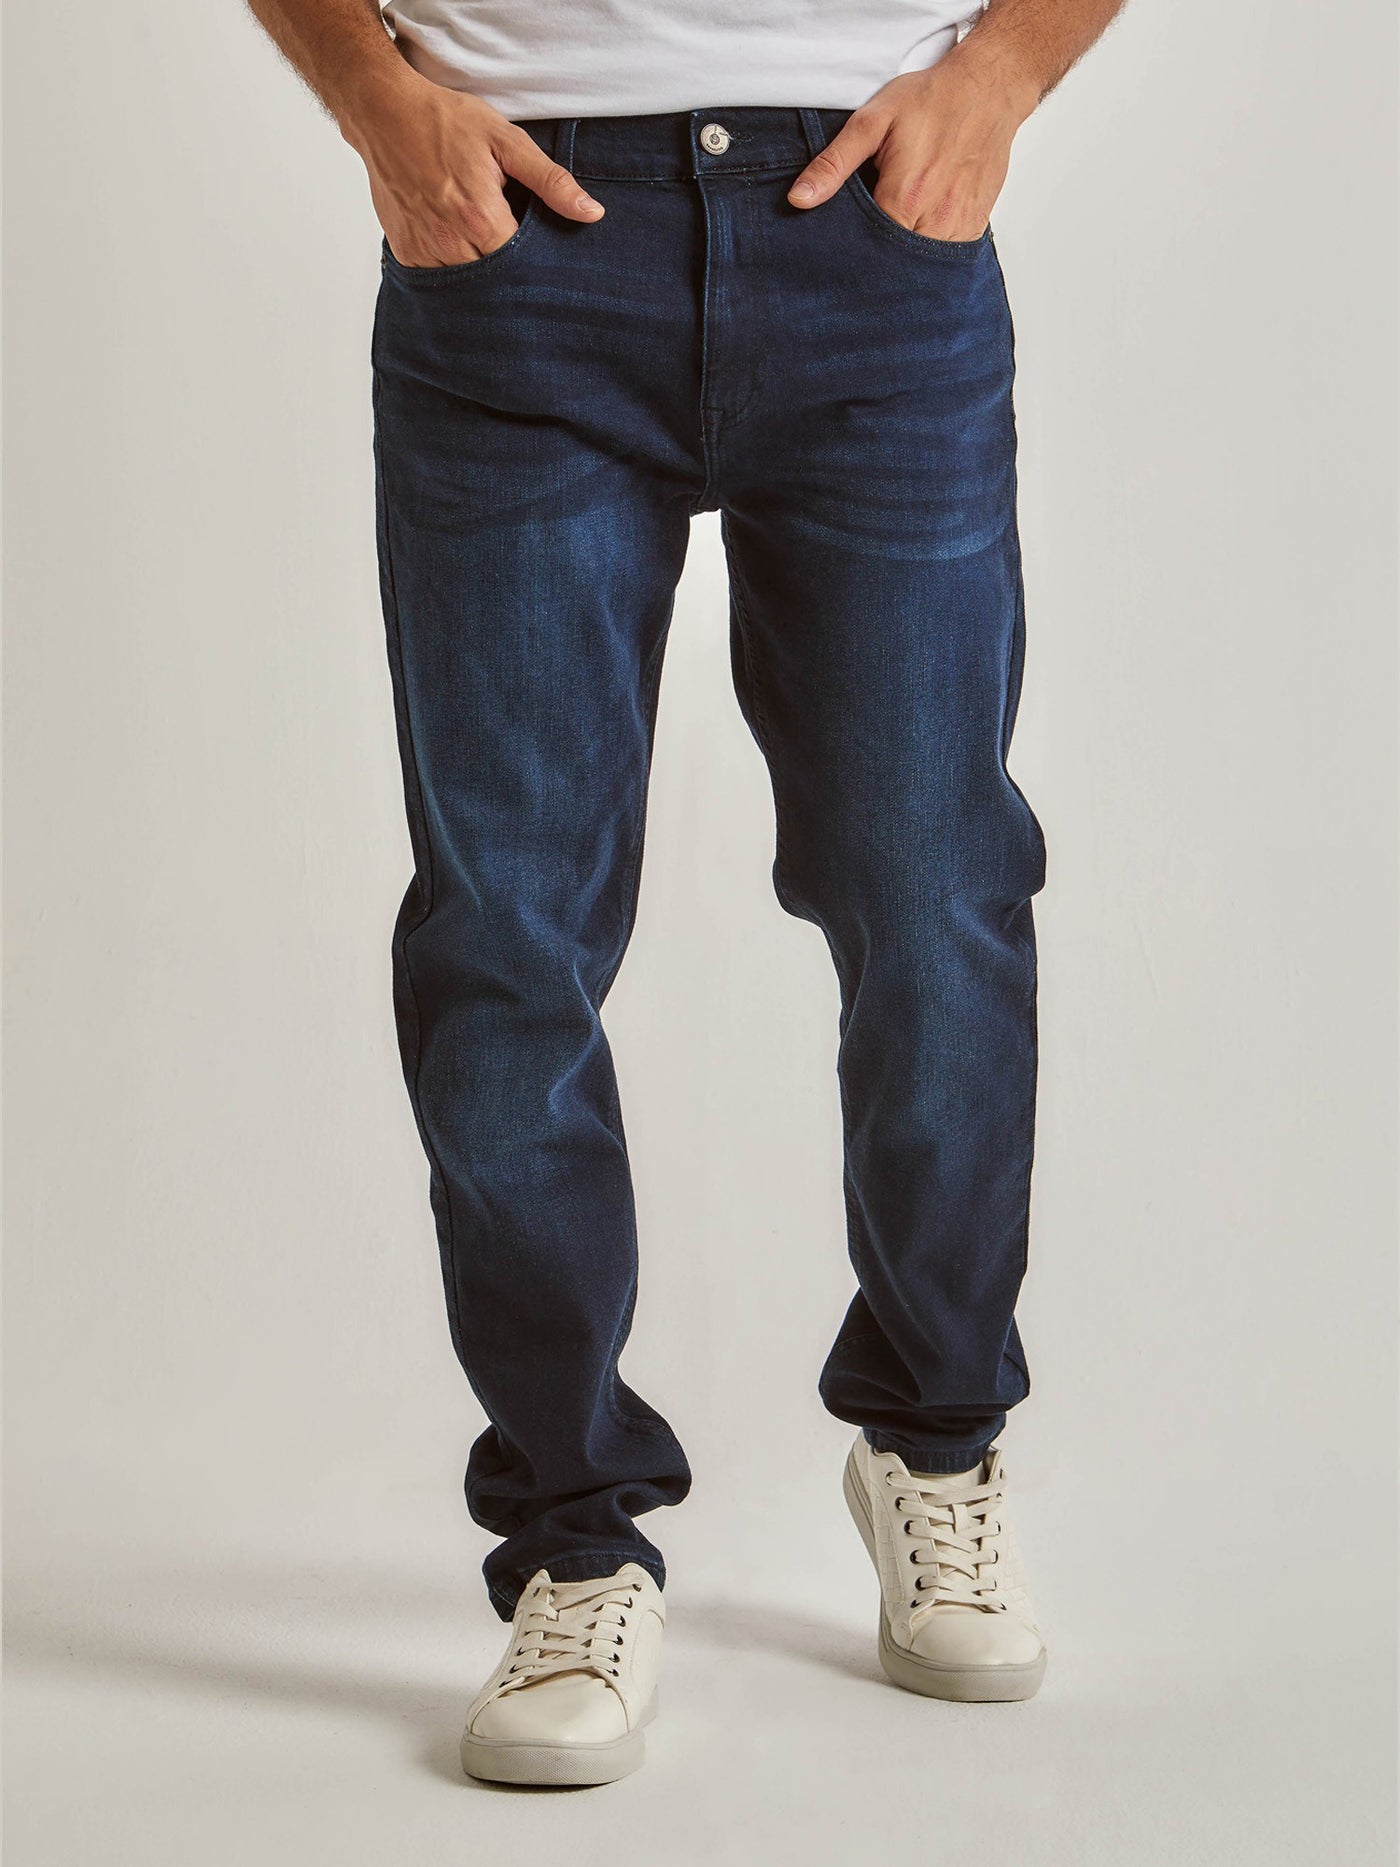 Jeans - Regular Fit - Whiskers